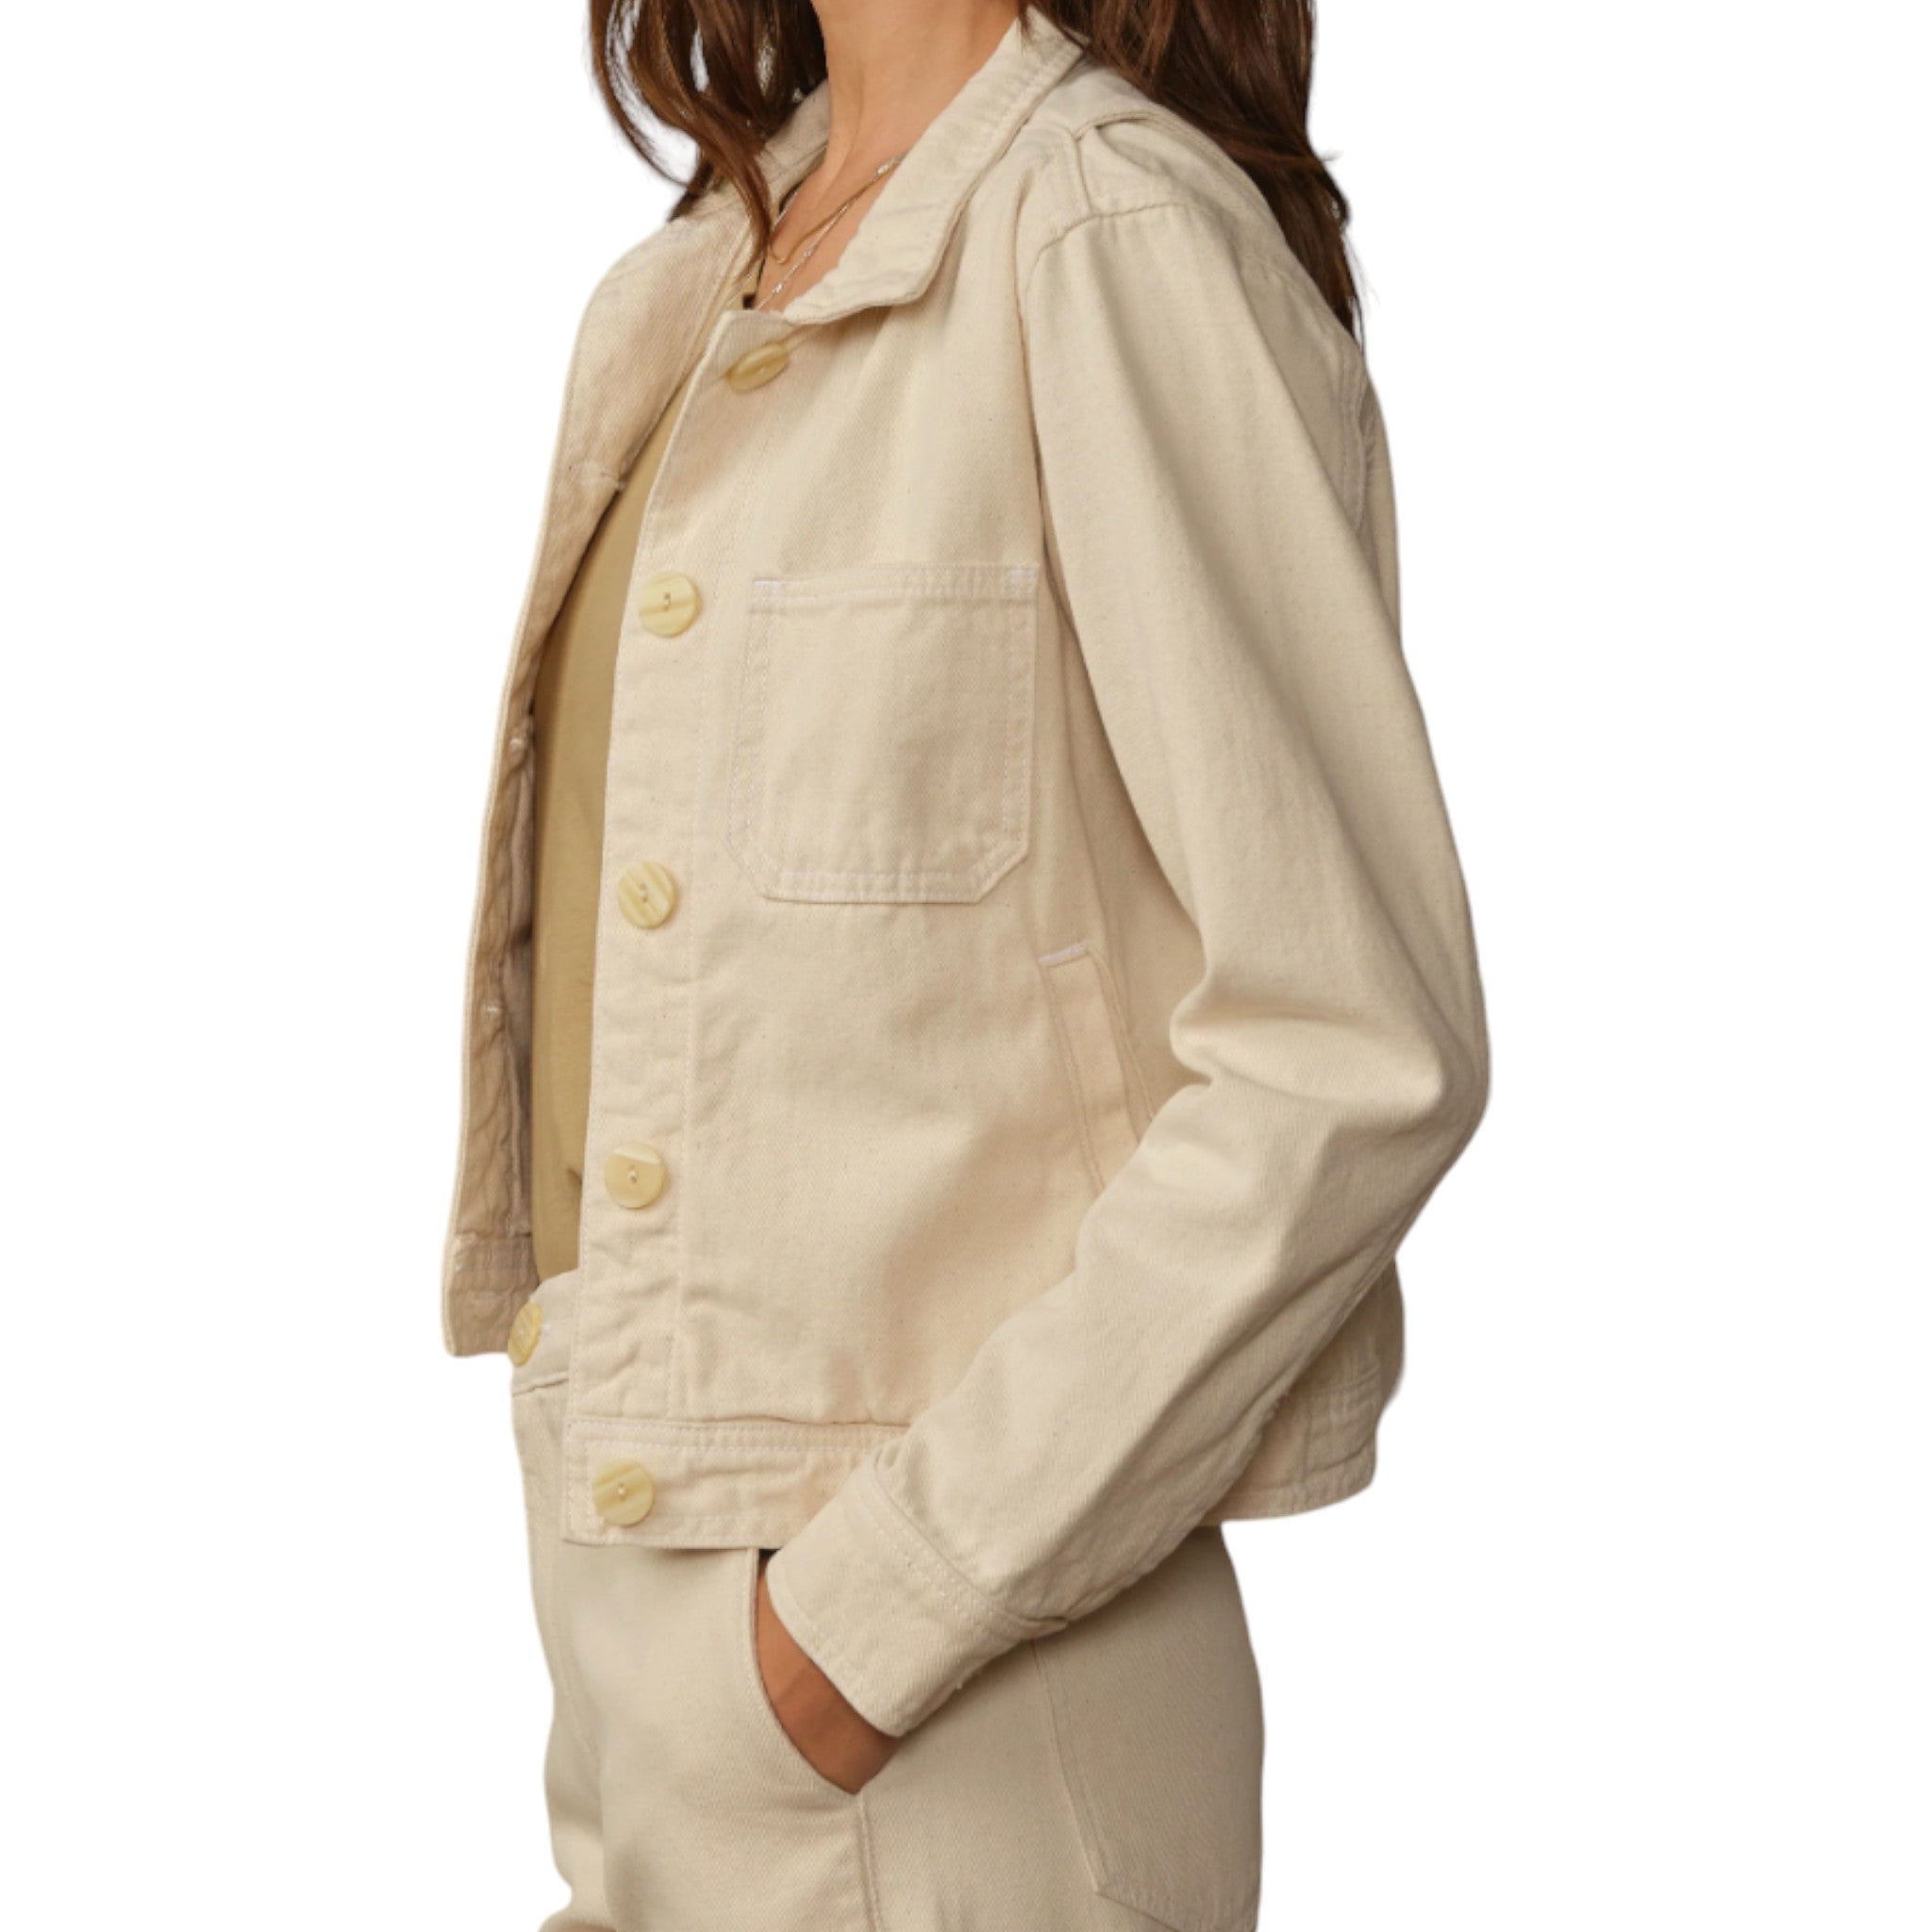 cream, denim style button up jacket with patch pockets on the chest and regular pockets with a cinching detail at the waist in the back